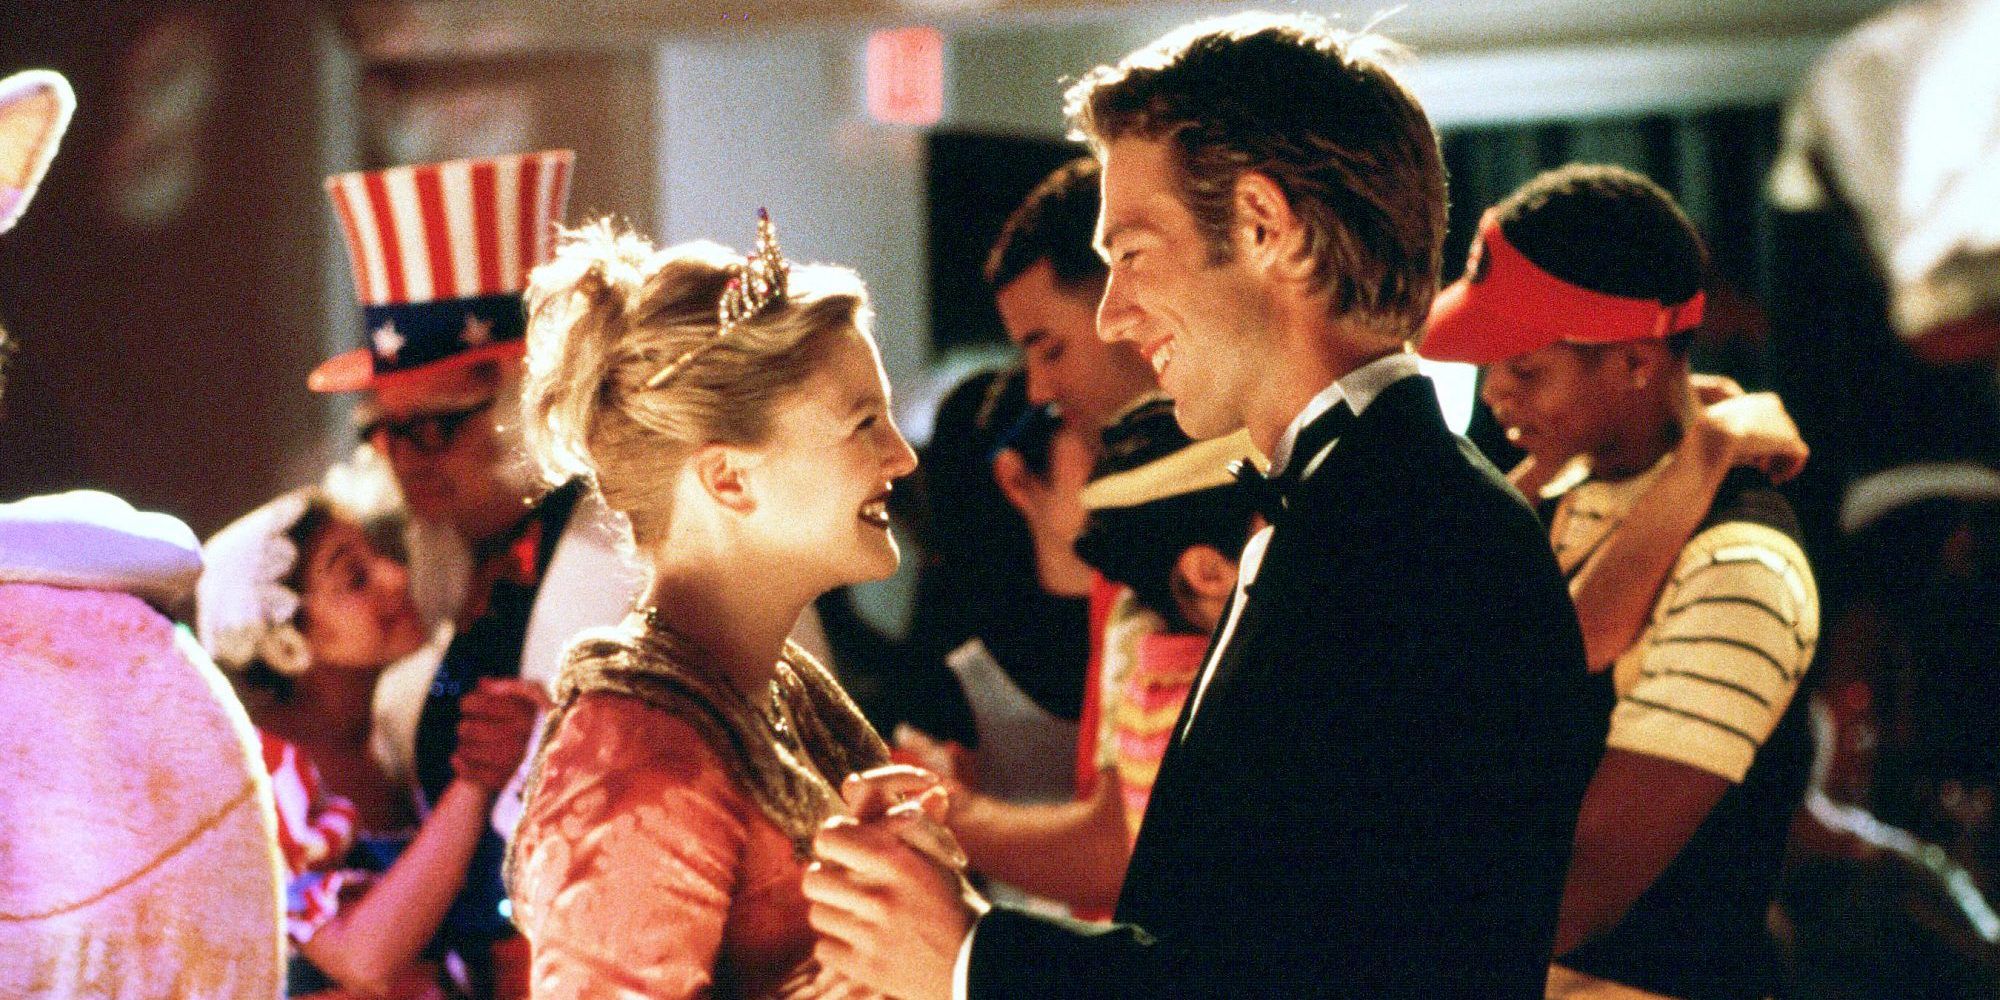 Drew Barrymore and Michael Vartan at Prom in Never Been Kissed